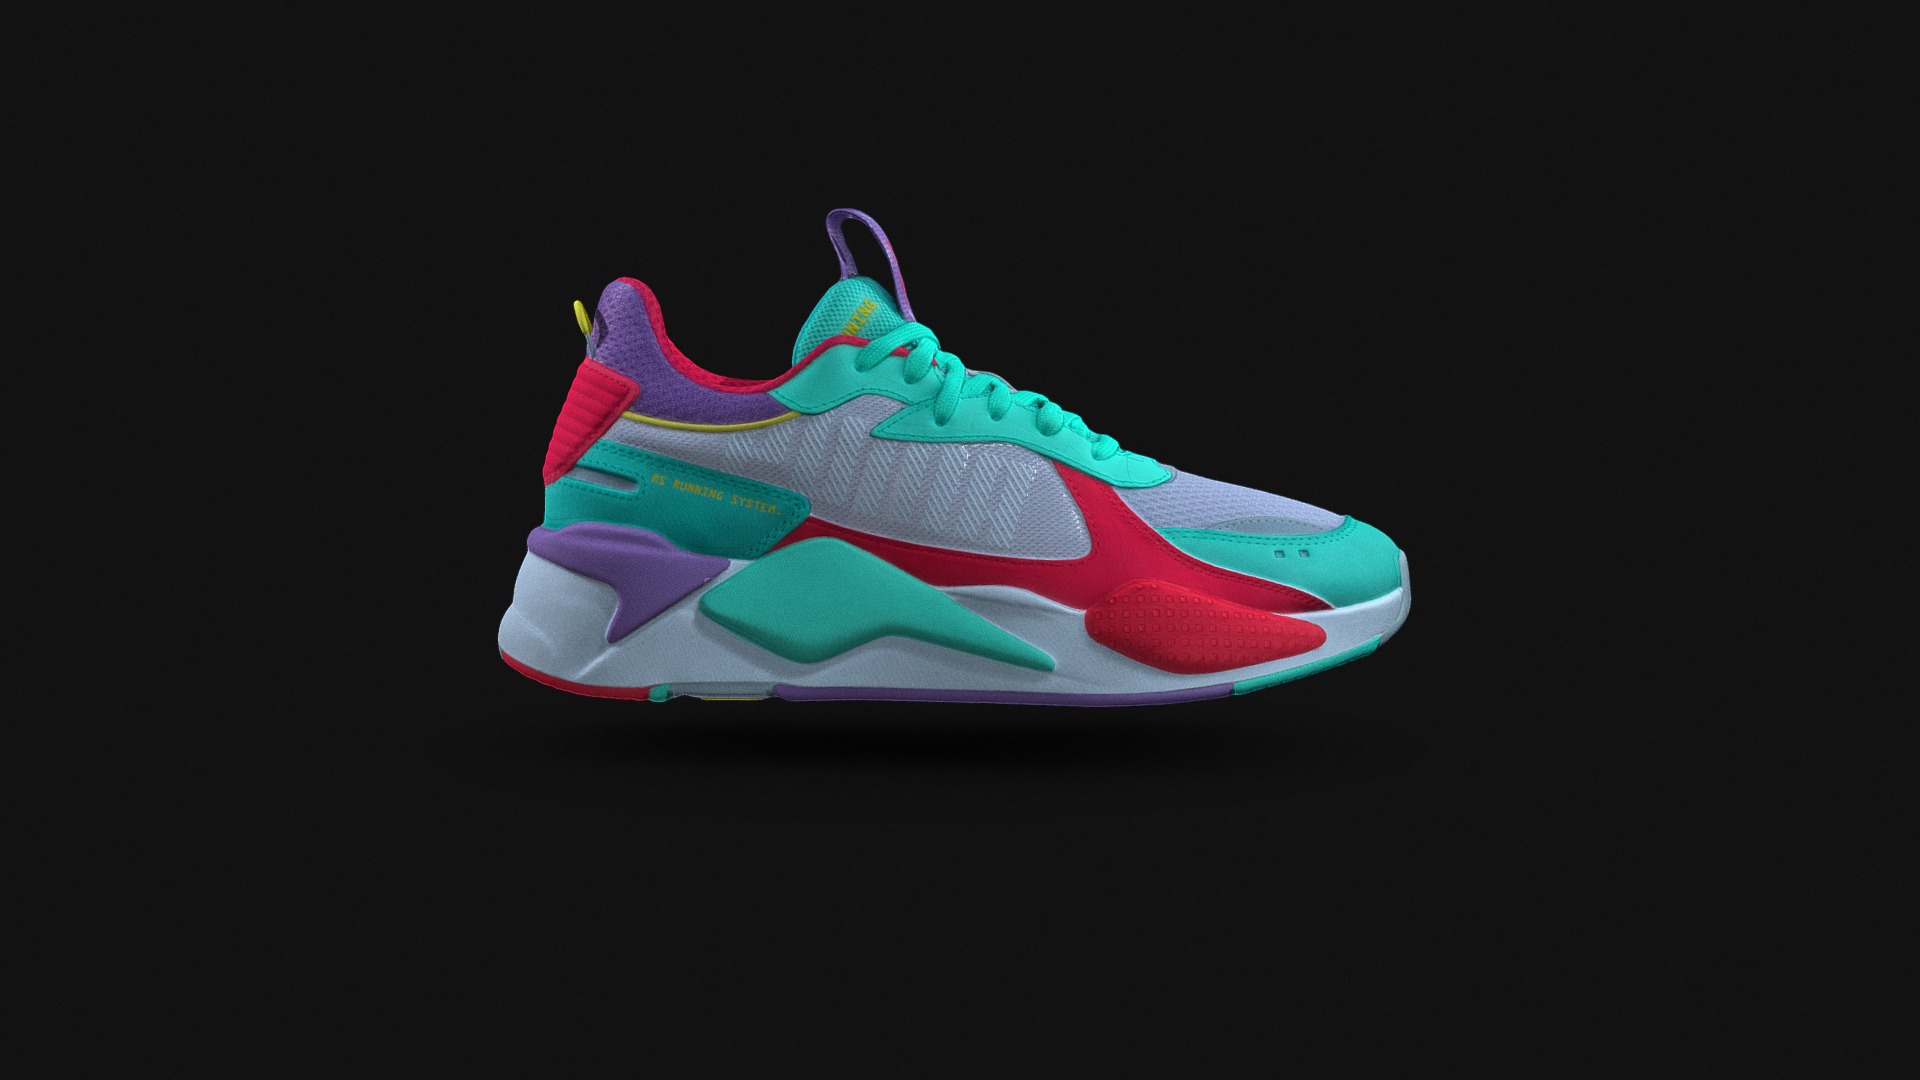 3D model Puma RS-X Running System - This is a 3D model of the Puma RS-X Running System. The 3D model is about a colorful shoe on a black background.